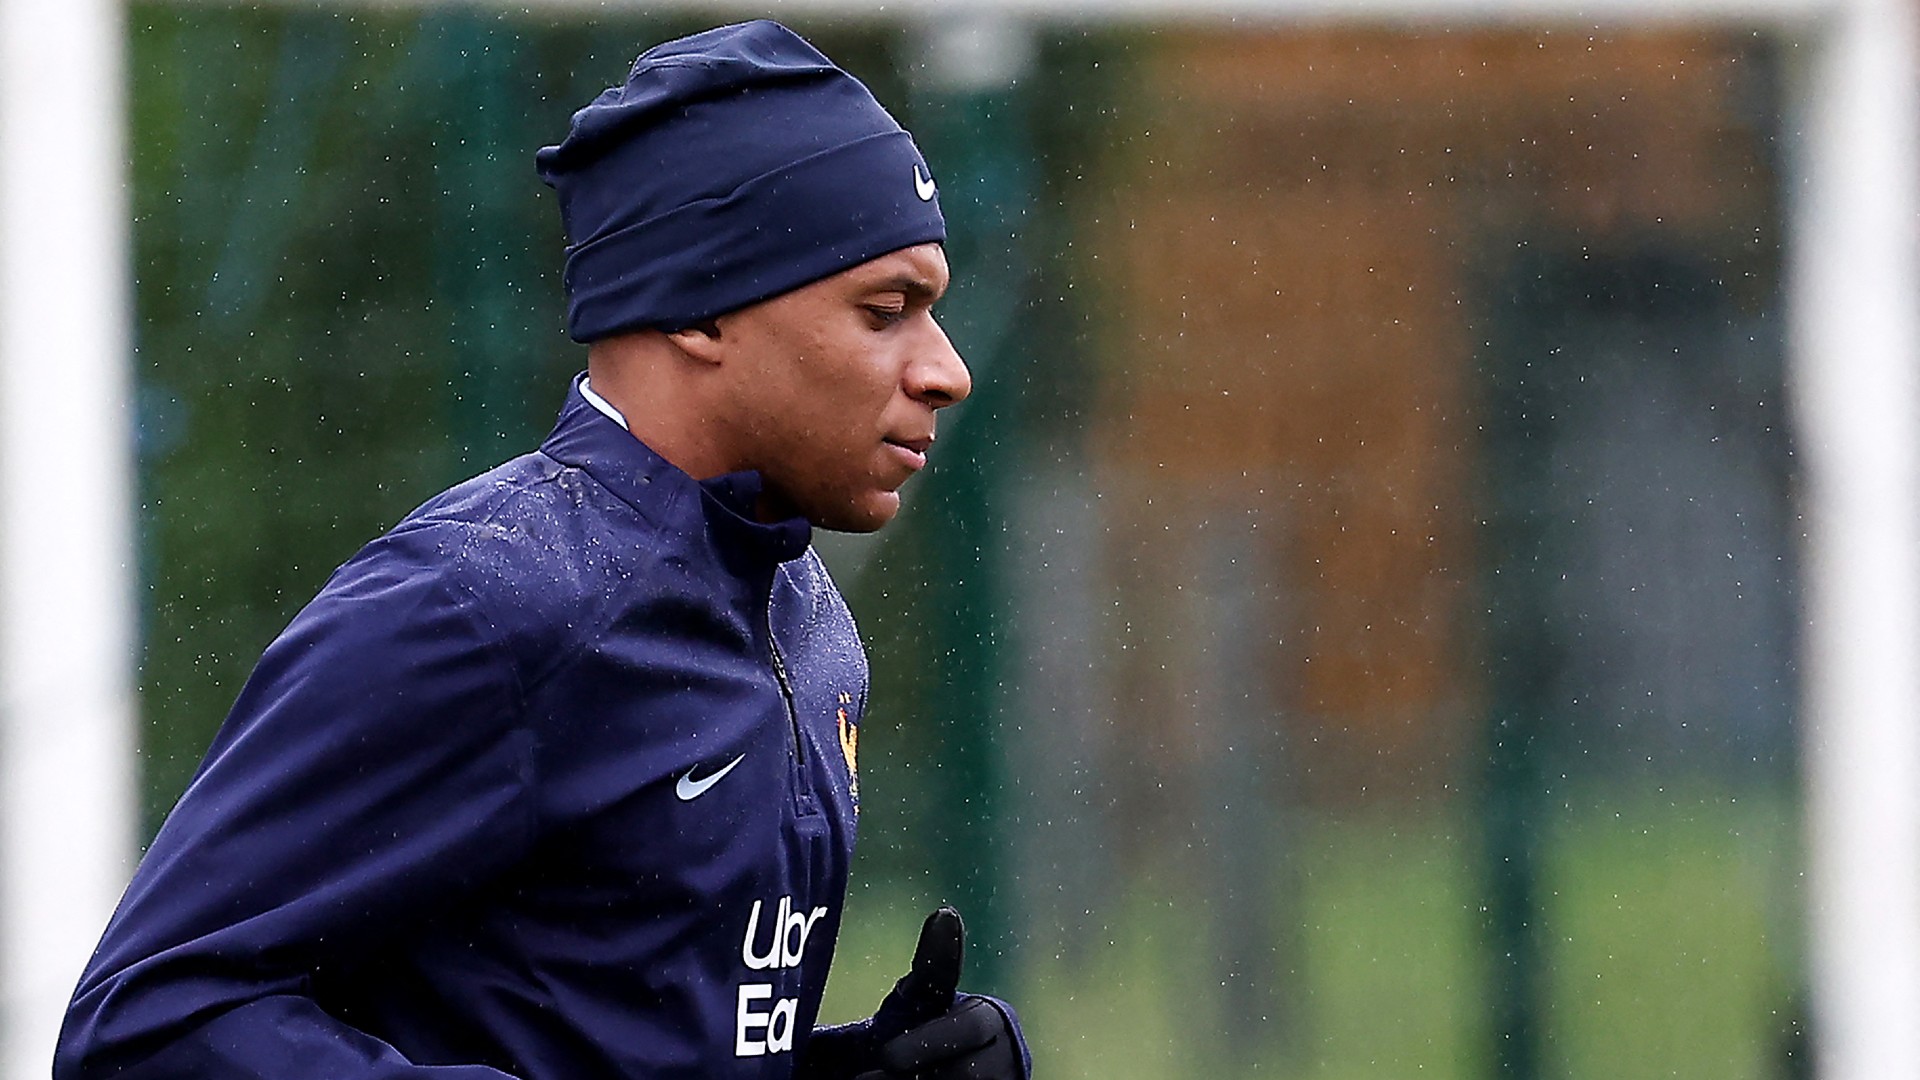 Mbappe: unhappy with some at PSG